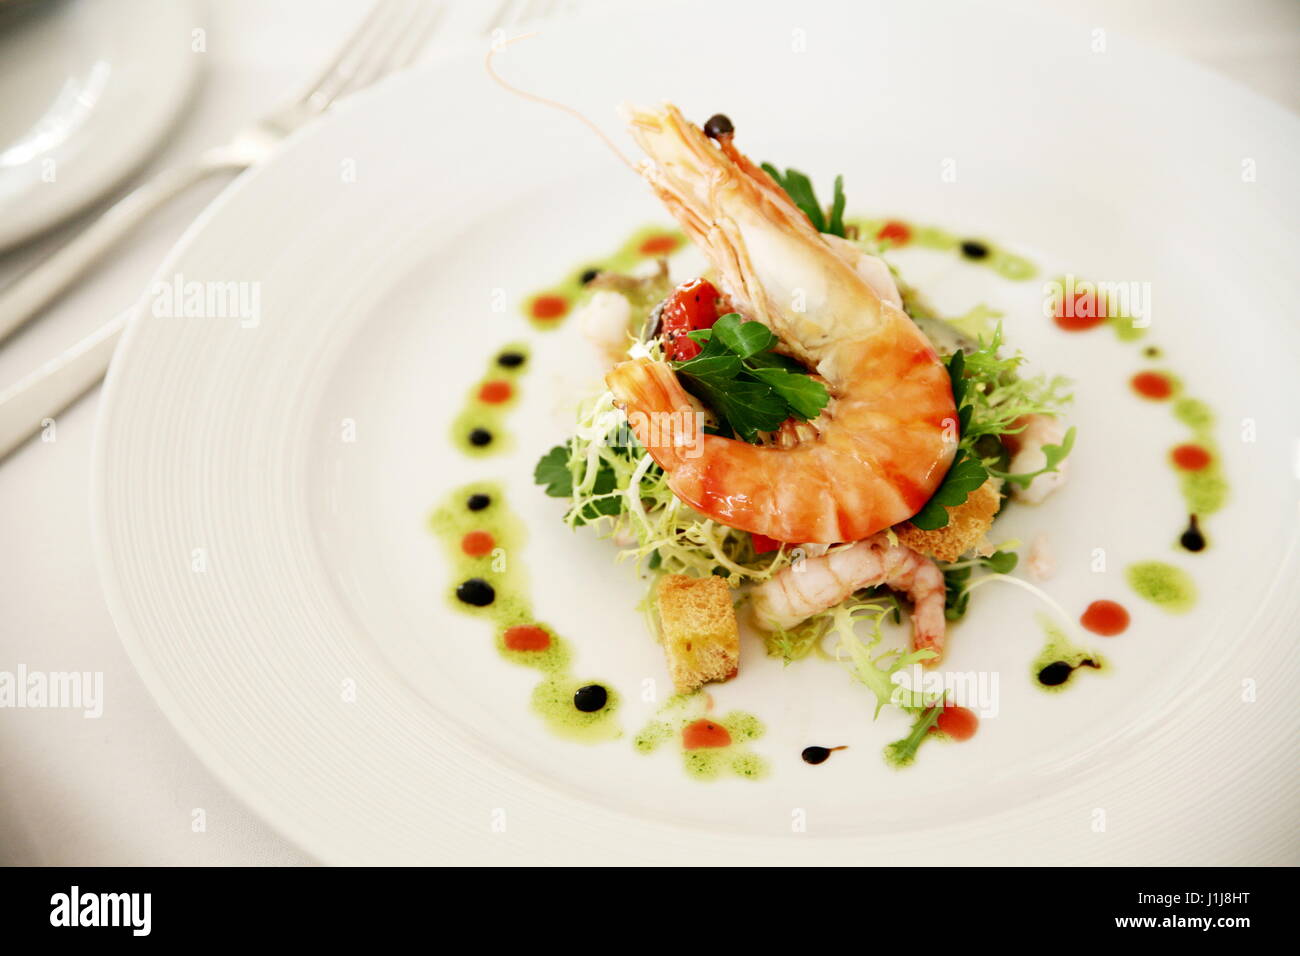 A starter dish of shrimp at a restaurant table Stock Photo